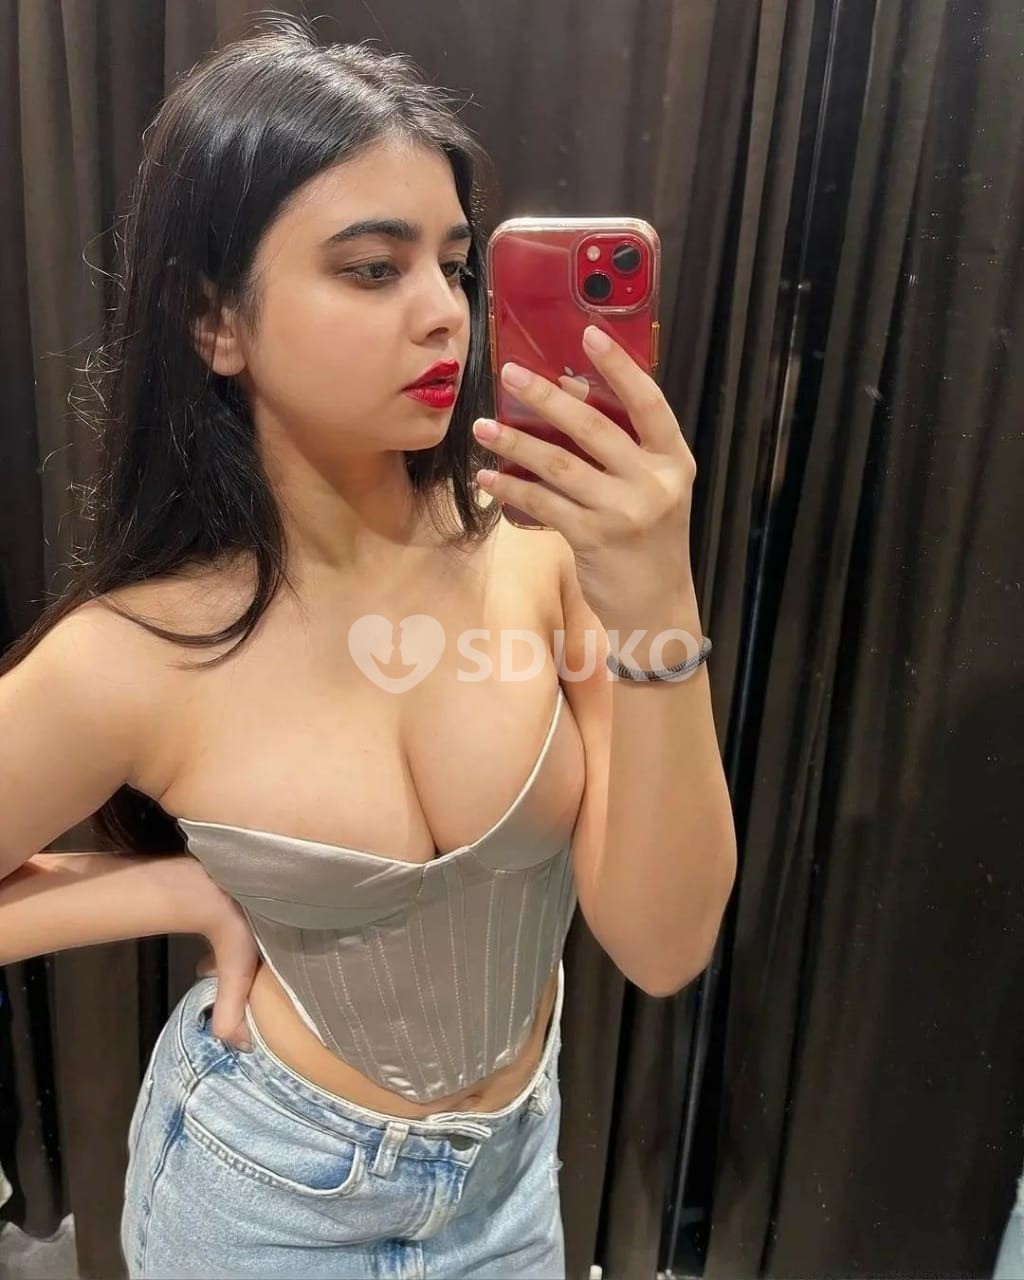 AURANGABAD VIP TODAY LOW ;)PRICE ESCORT 🥰SERVICE 100% SAFE AND SECURE ANYTIME CALL ME 24 X 7 SERVICE AVAILABLE 100% S